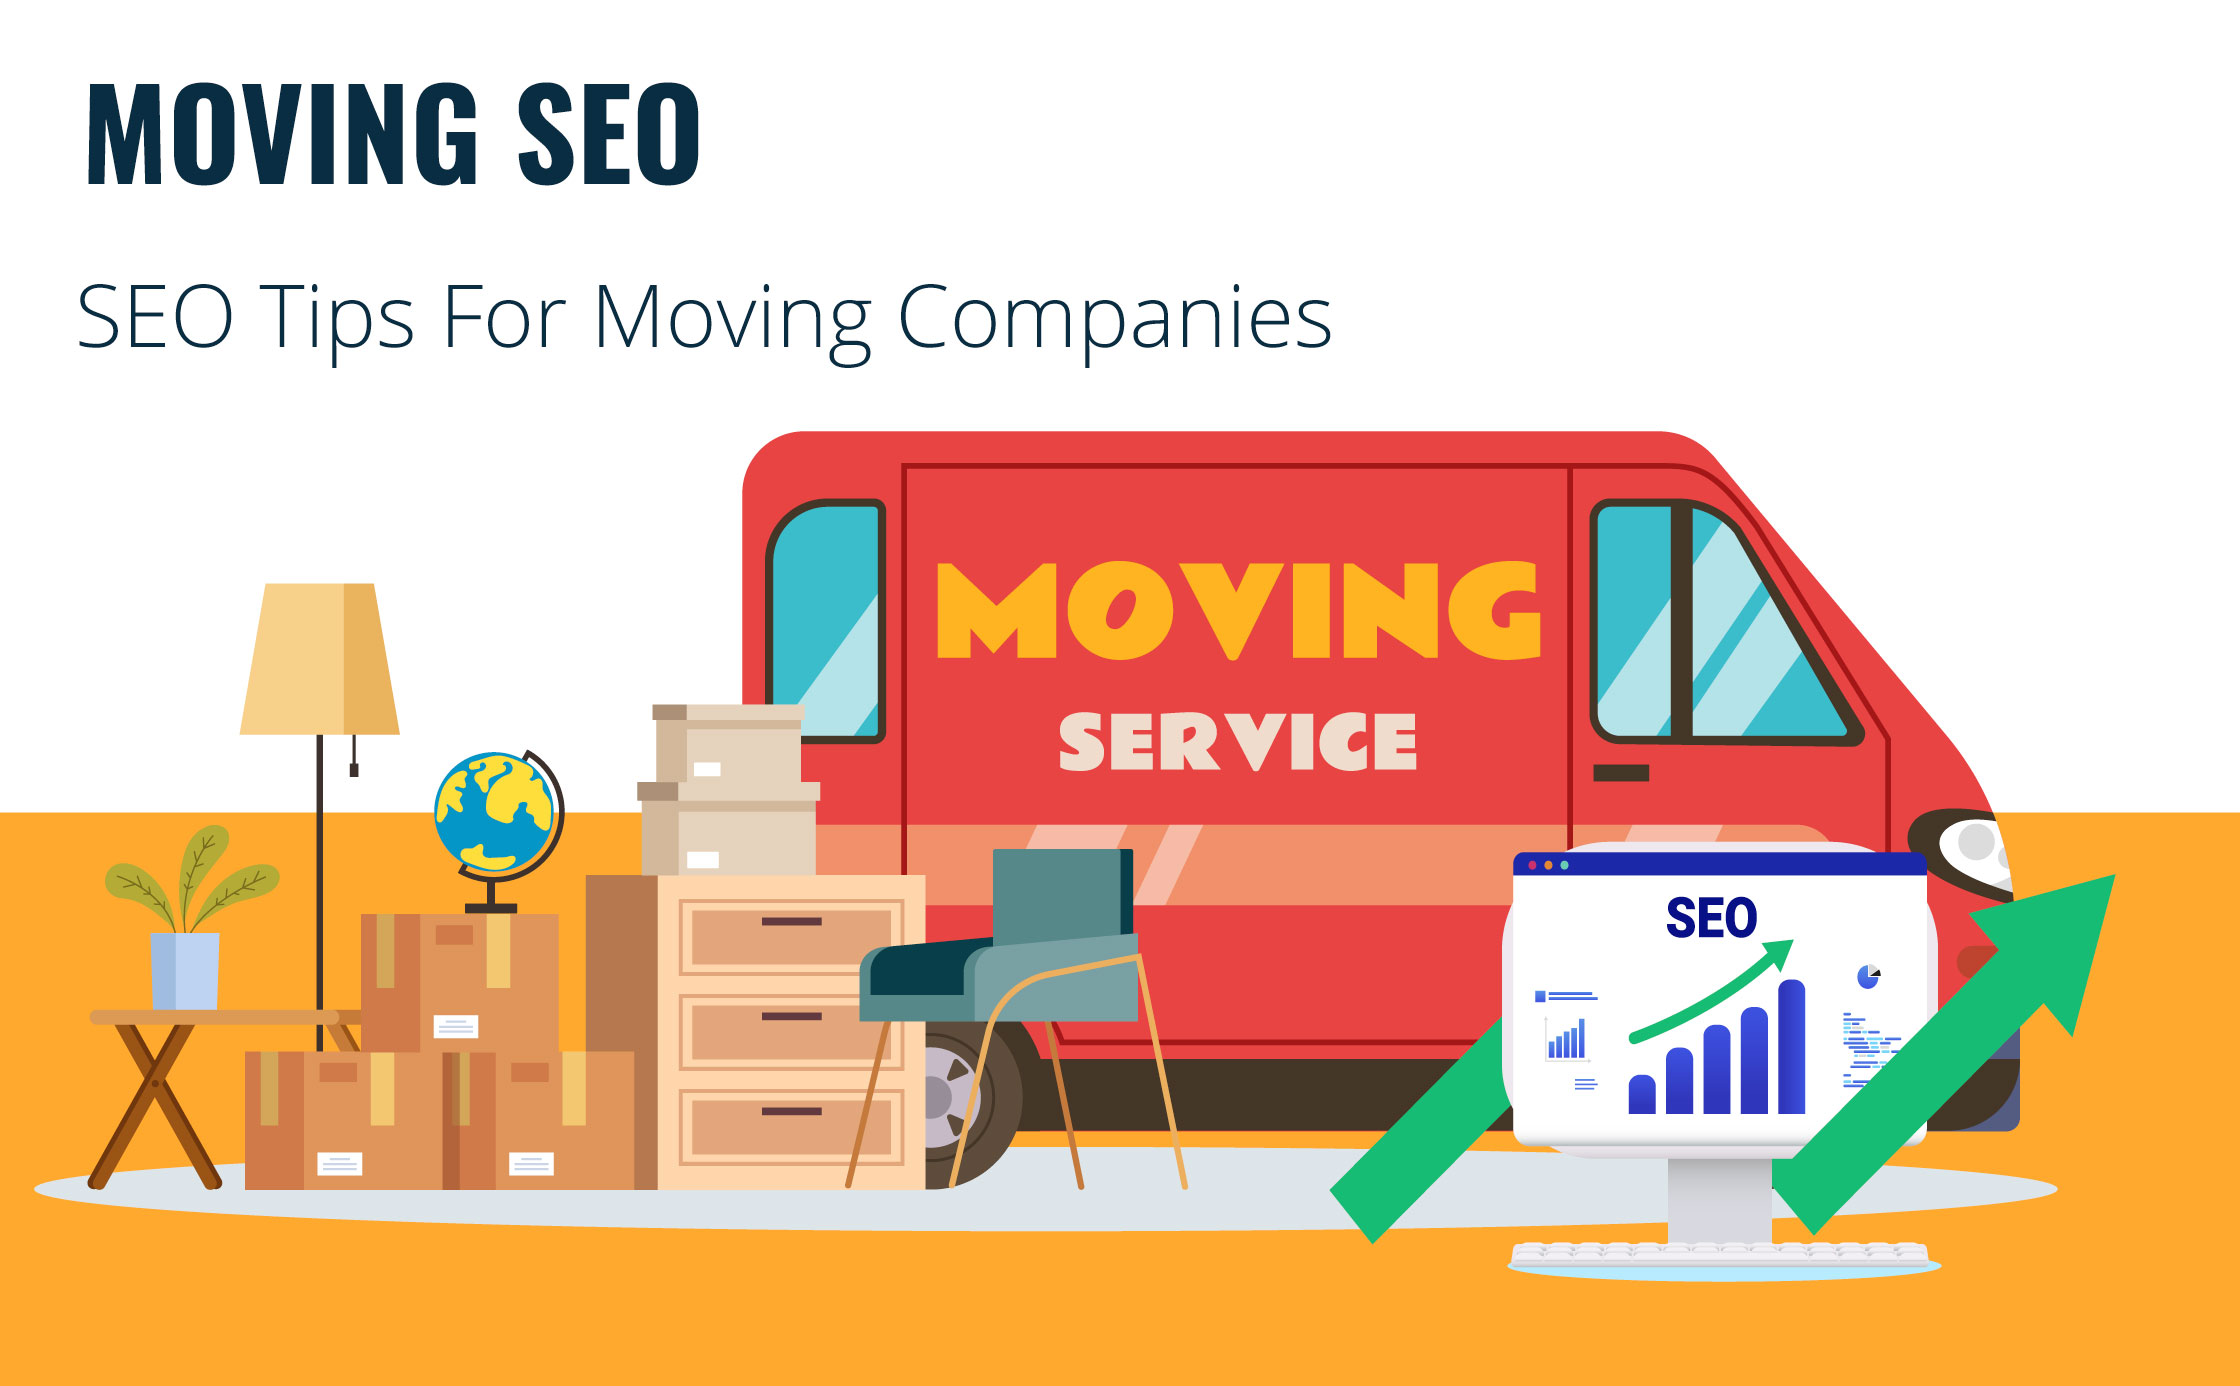 Moving SEO: 10 SEO Tips For Moving Companies